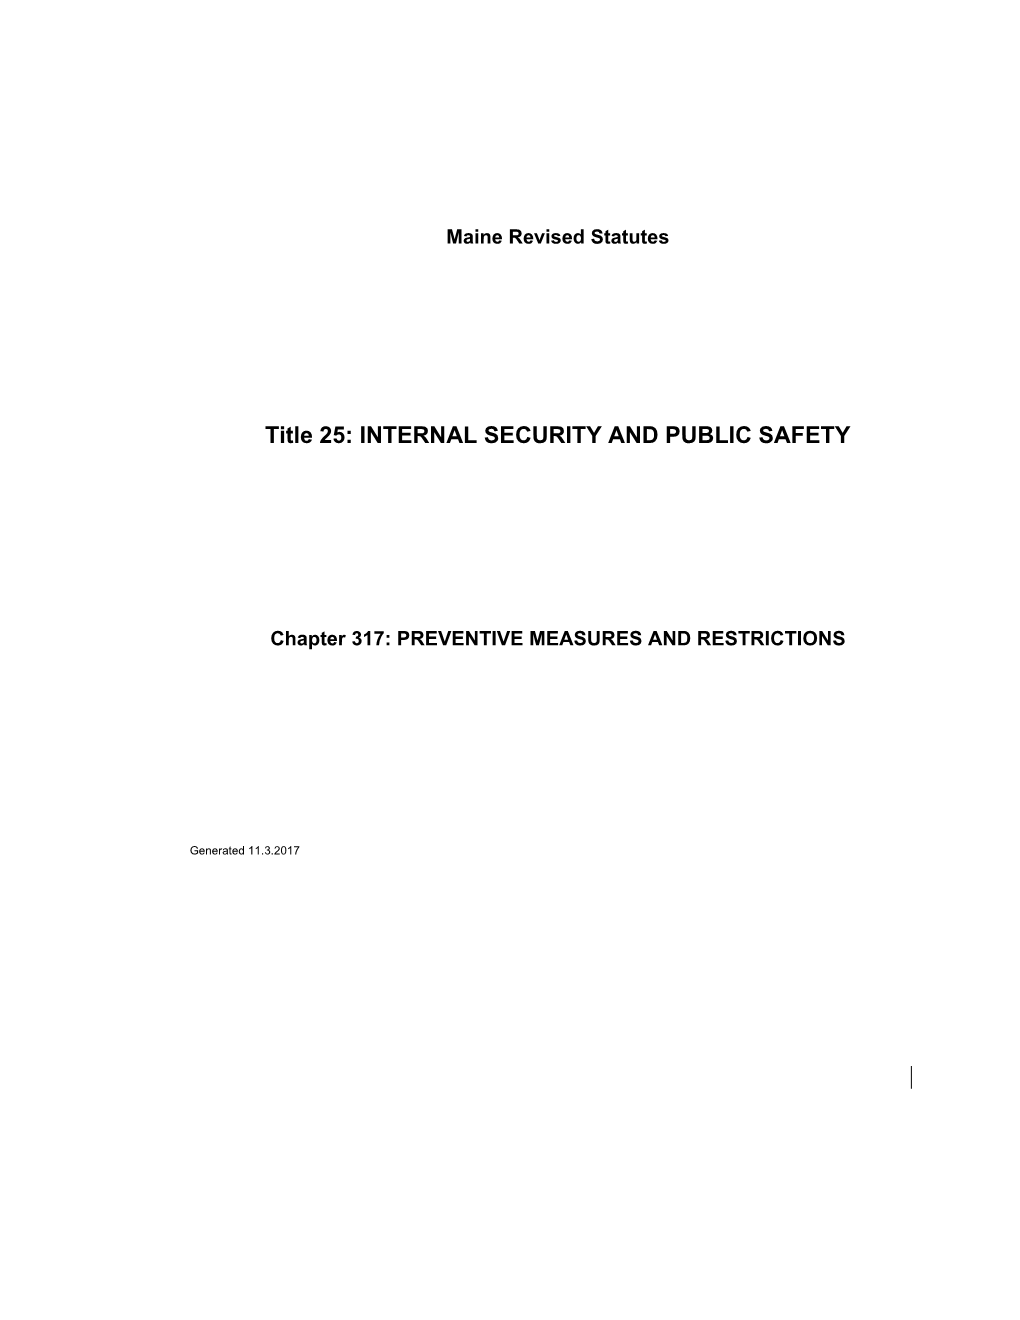 Title 25: INTERNAL SECURITY and PUBLIC SAFETY